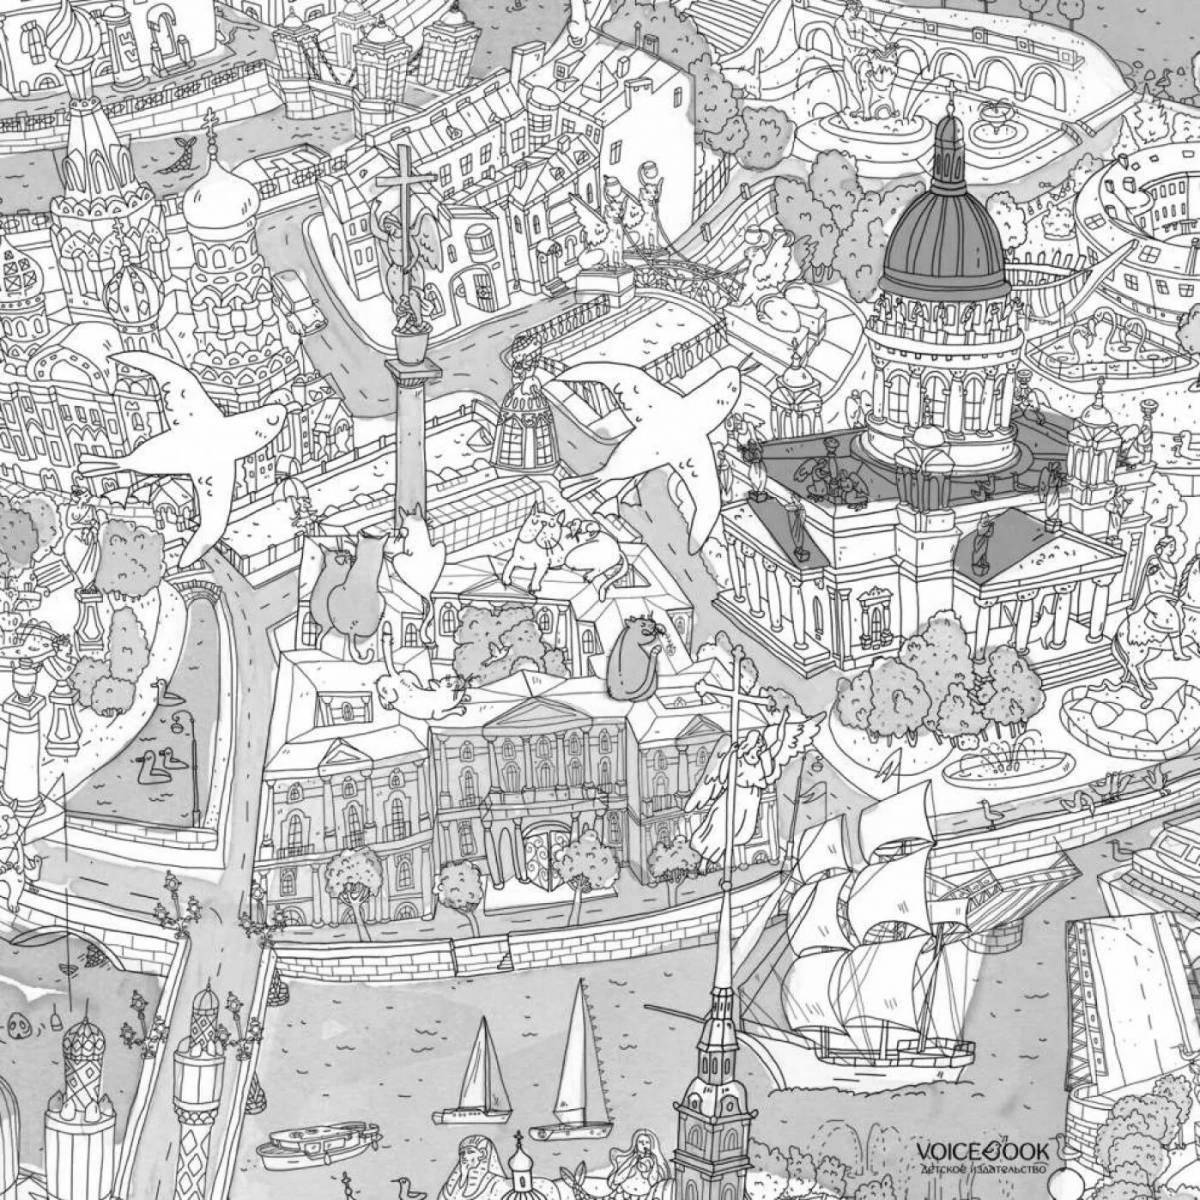 Awesome coloring map of st. petersburg